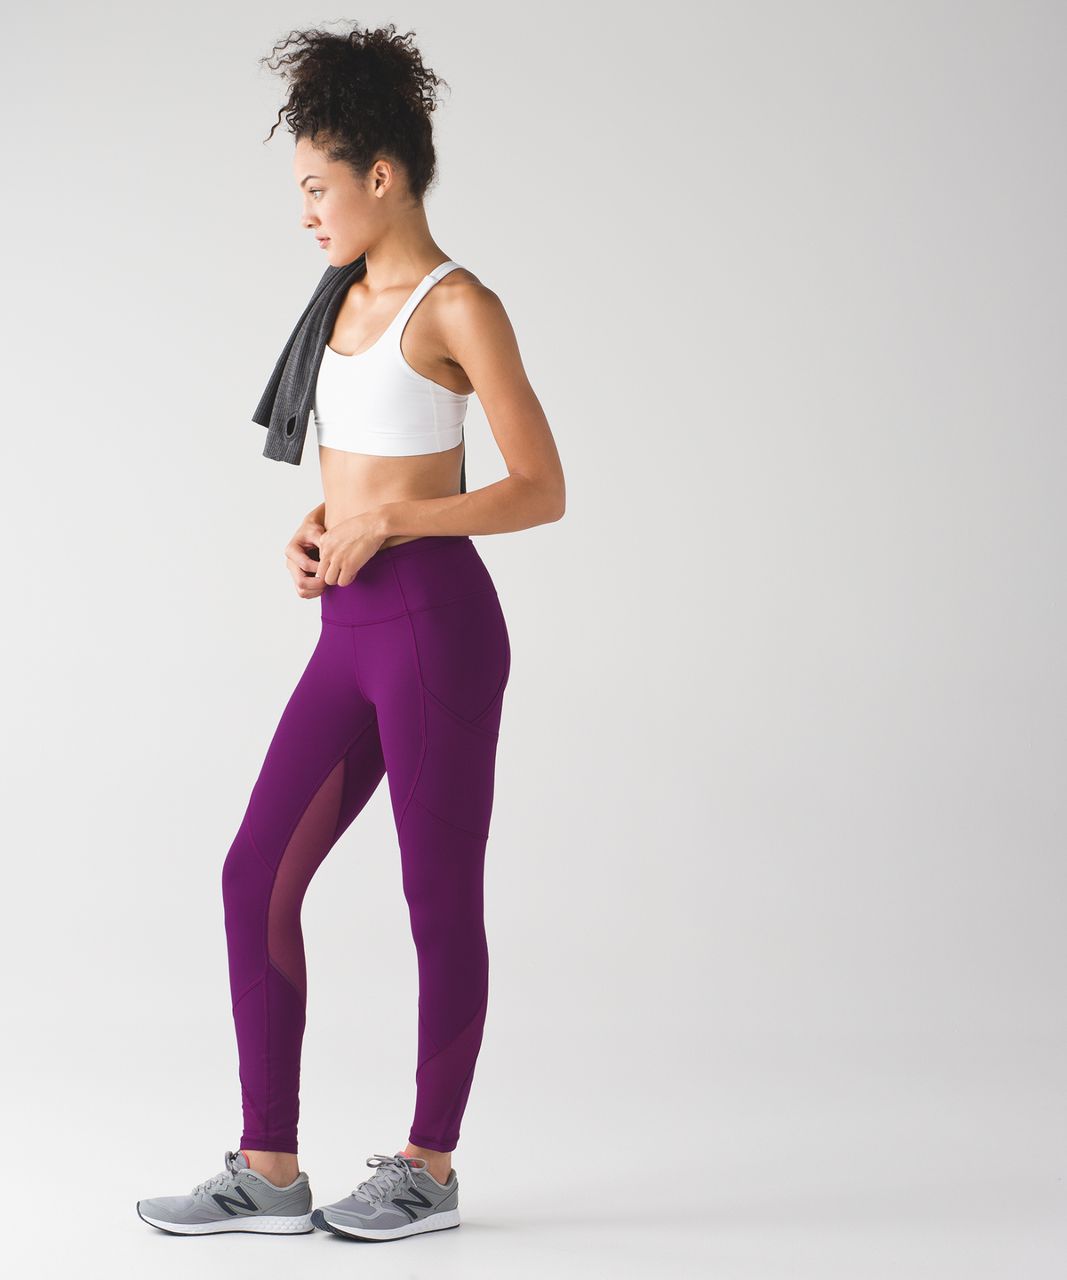 Lululemon Outrun Tight - Chilled Grape